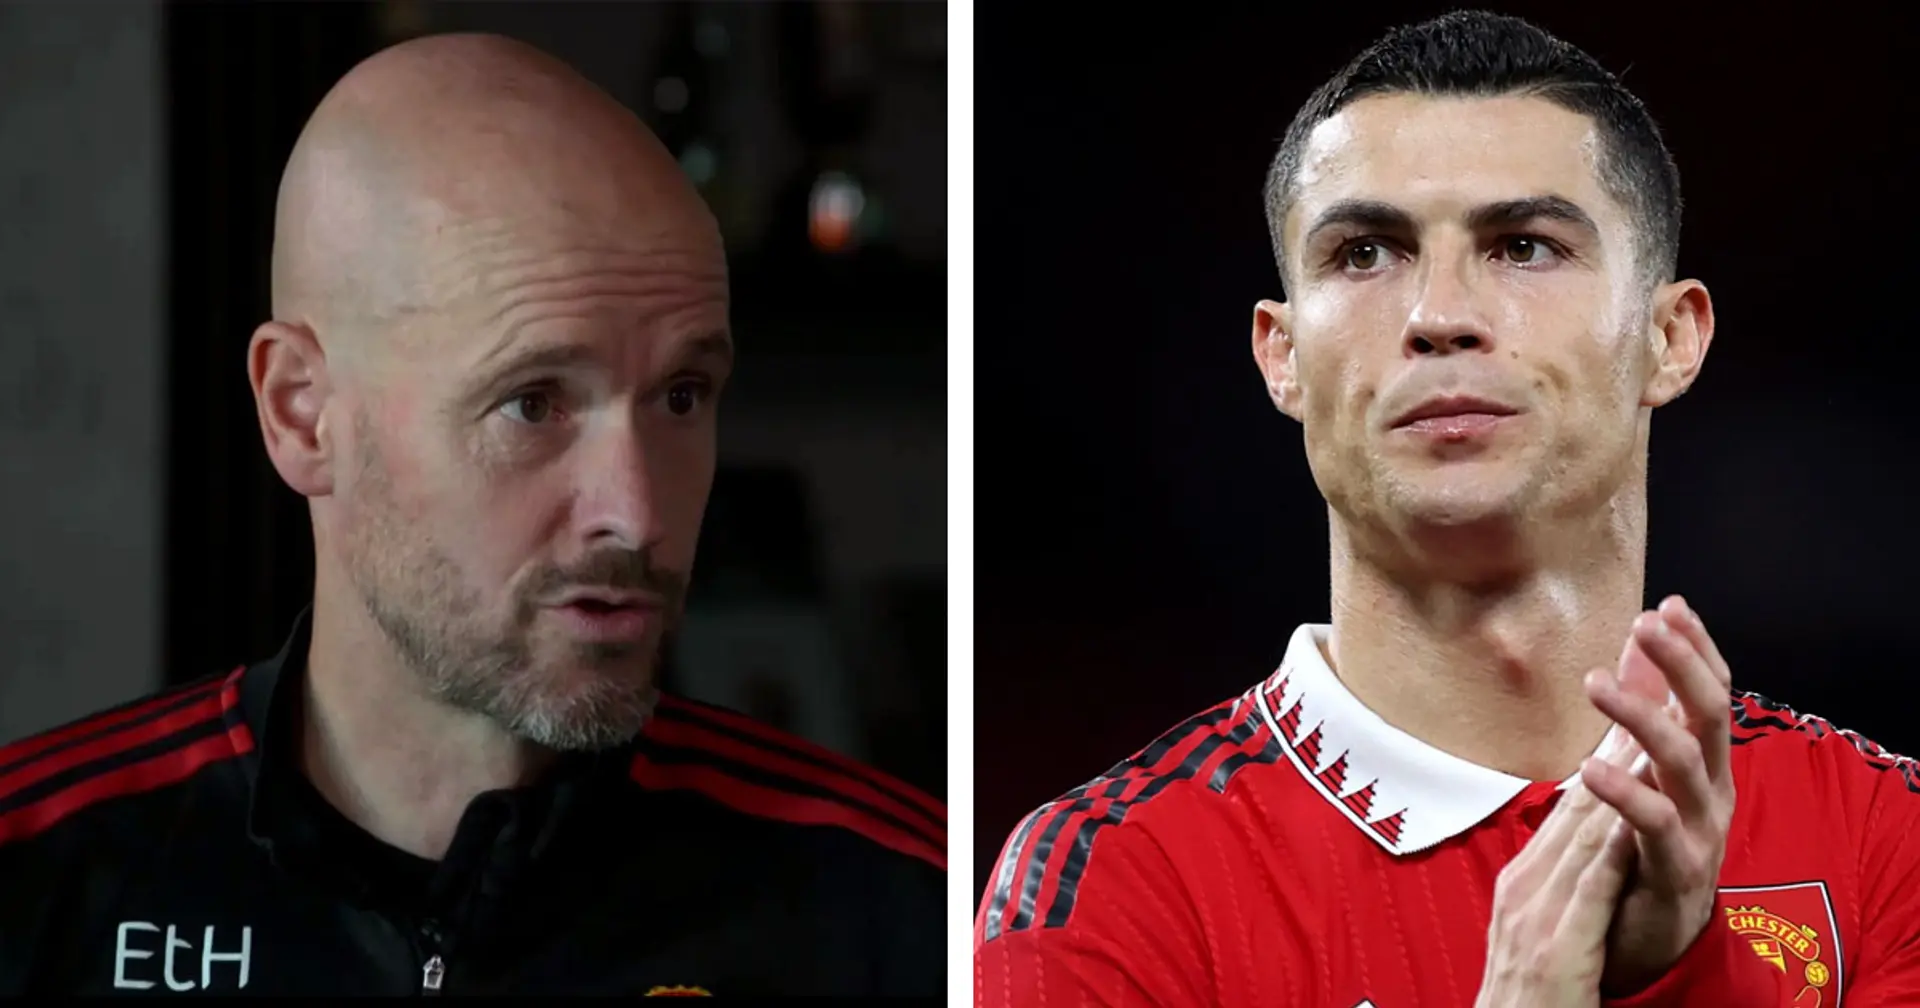 'I've given enough explanation': Ten Hag breaks silence on if Ronaldo apologized for Spurs walkout